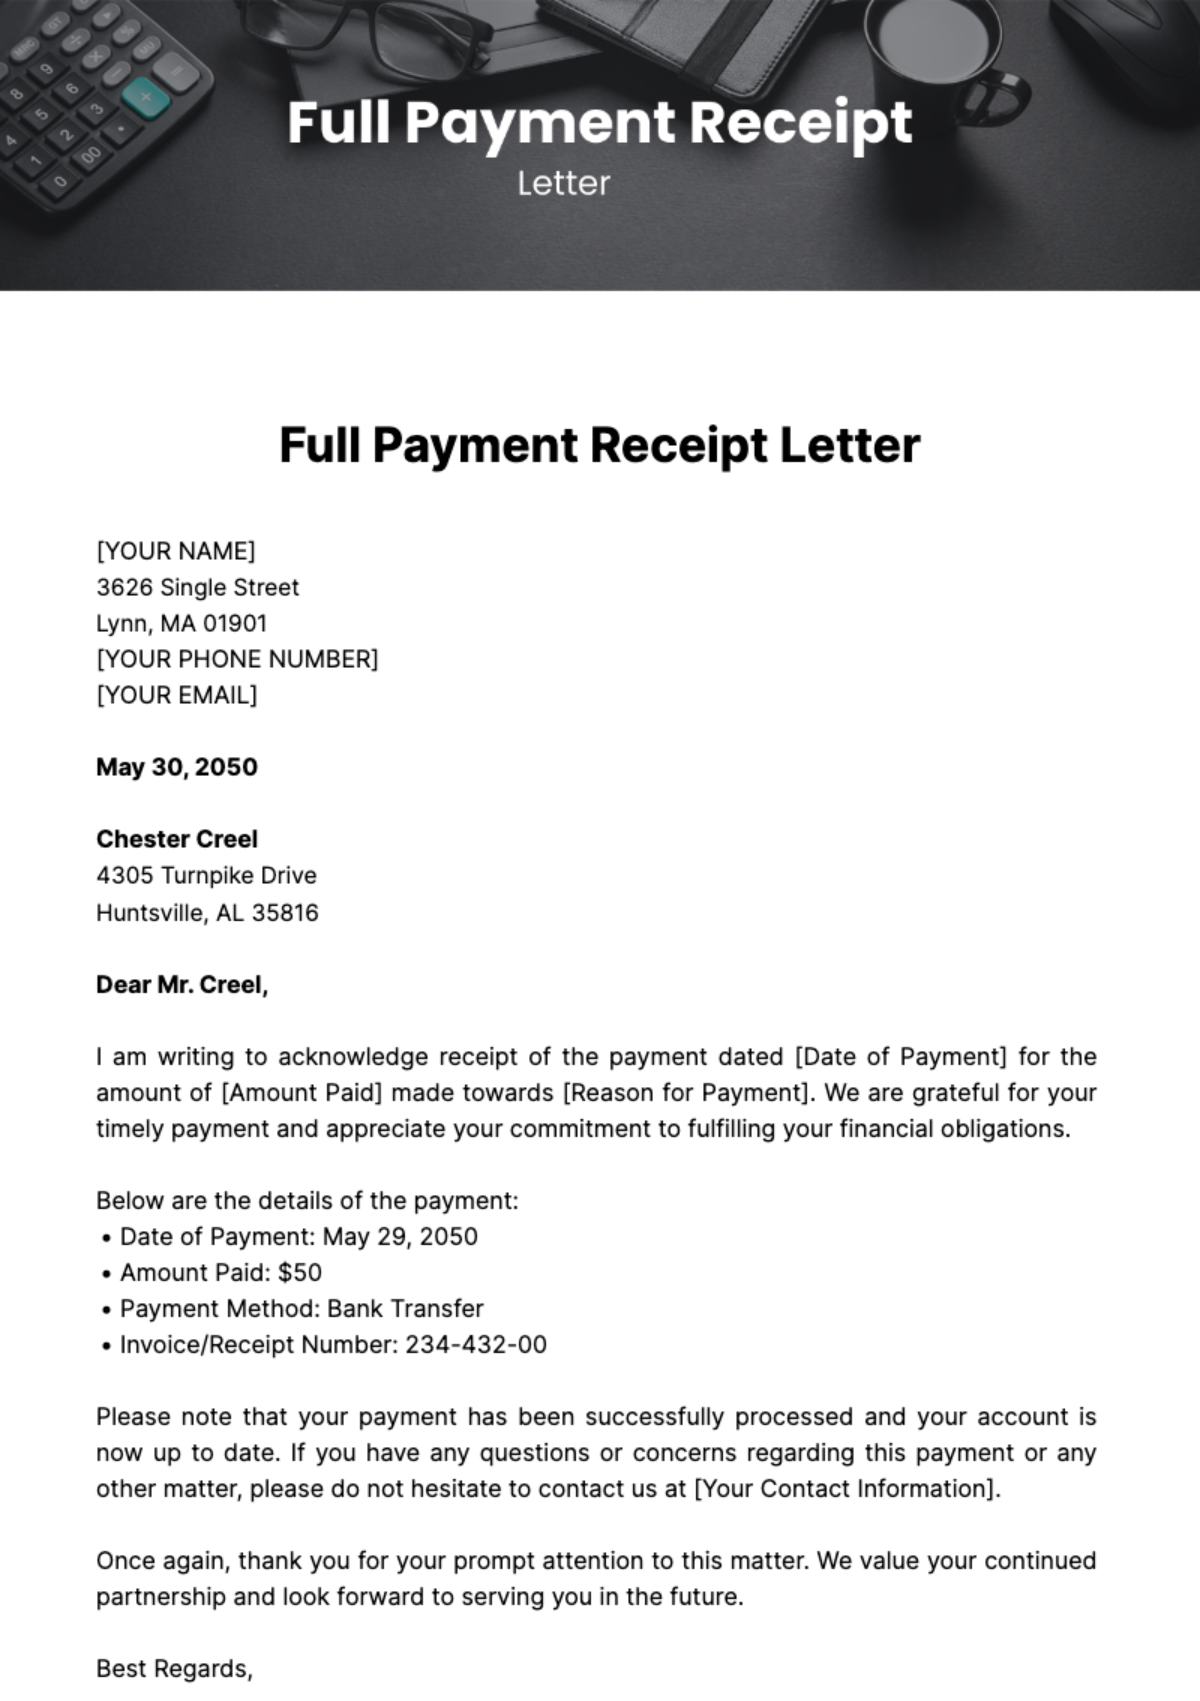 Full Payment Receipt Letter Template